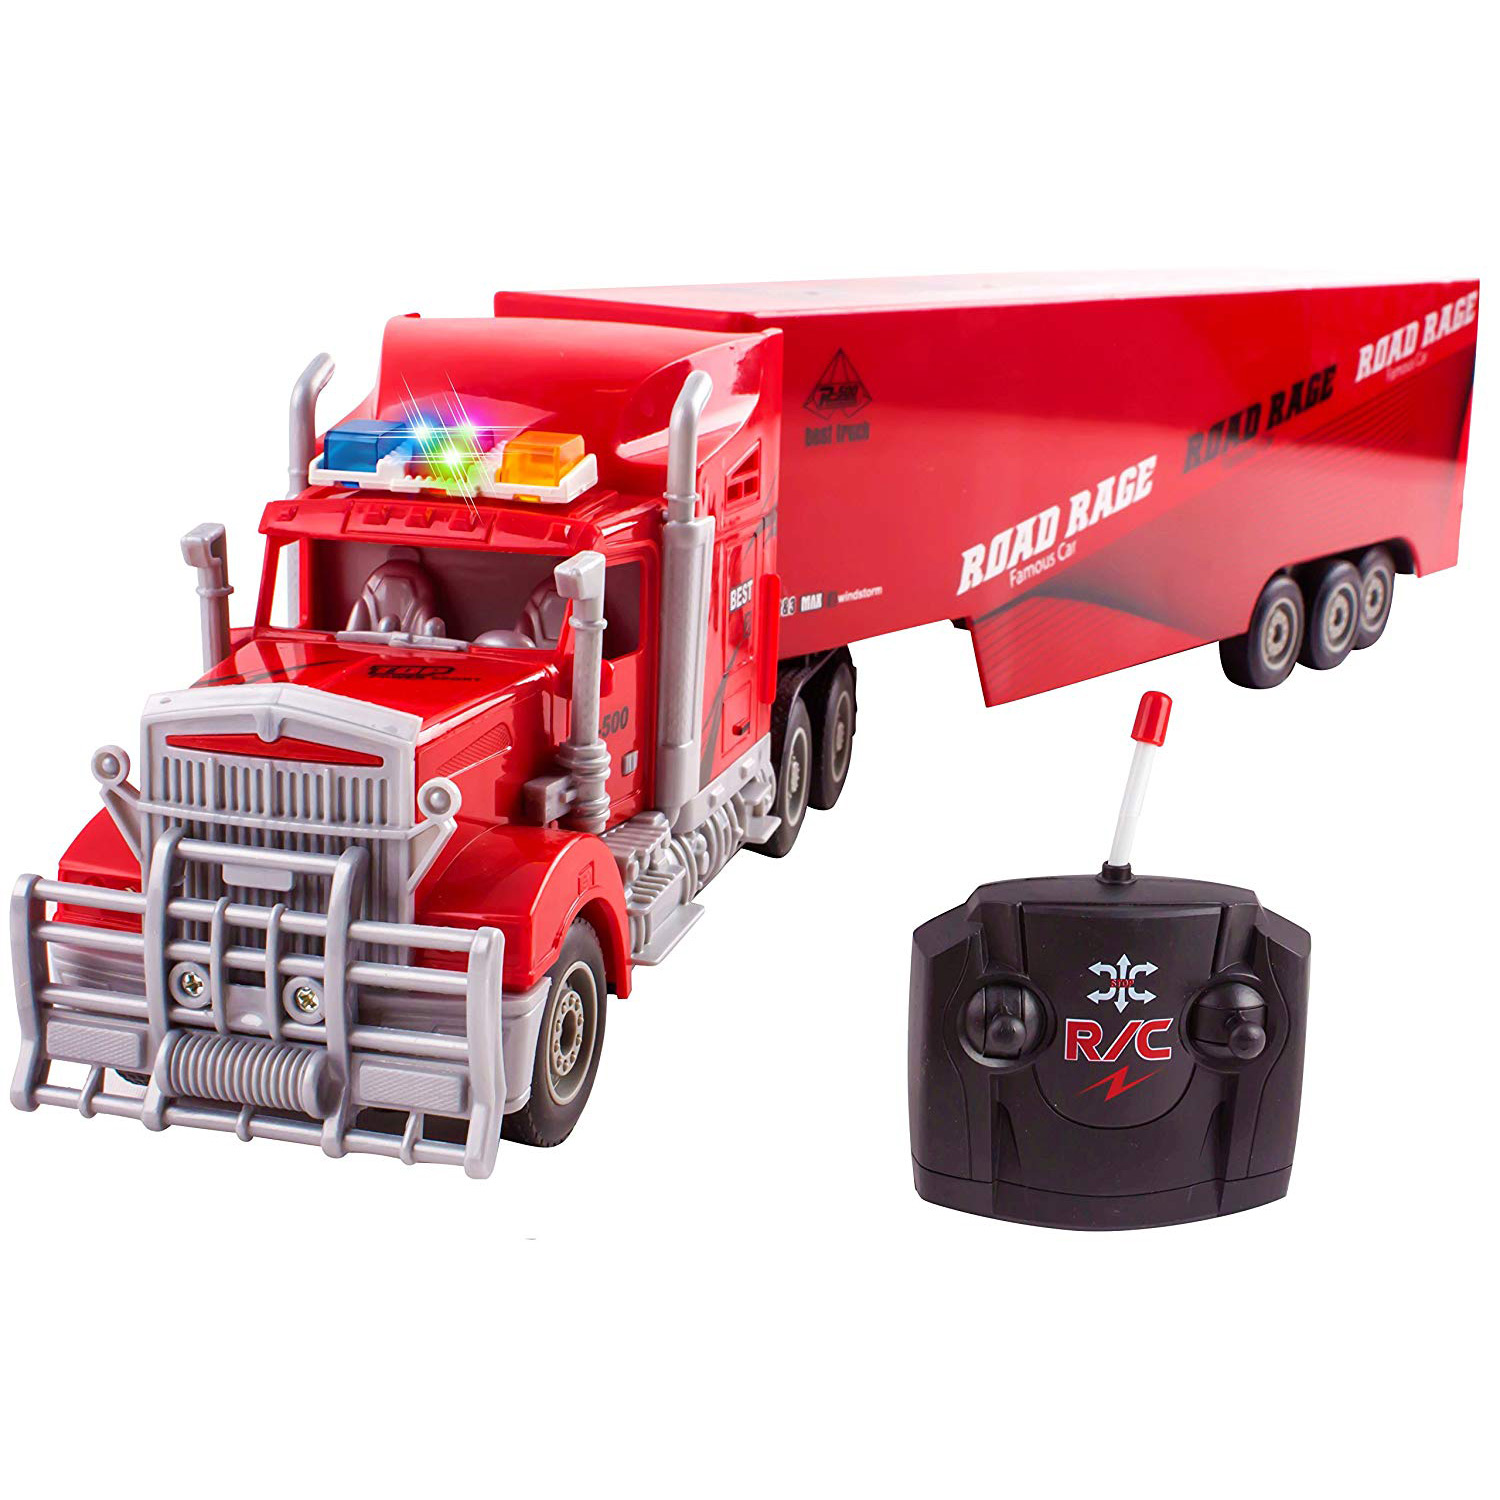 Toy Semi Truck Trailer 23" Electric Hauler Remote Control RC Children’s Transporter Ready To Run Full Cargo Perfect Big Rig For Kids Toys (Red)